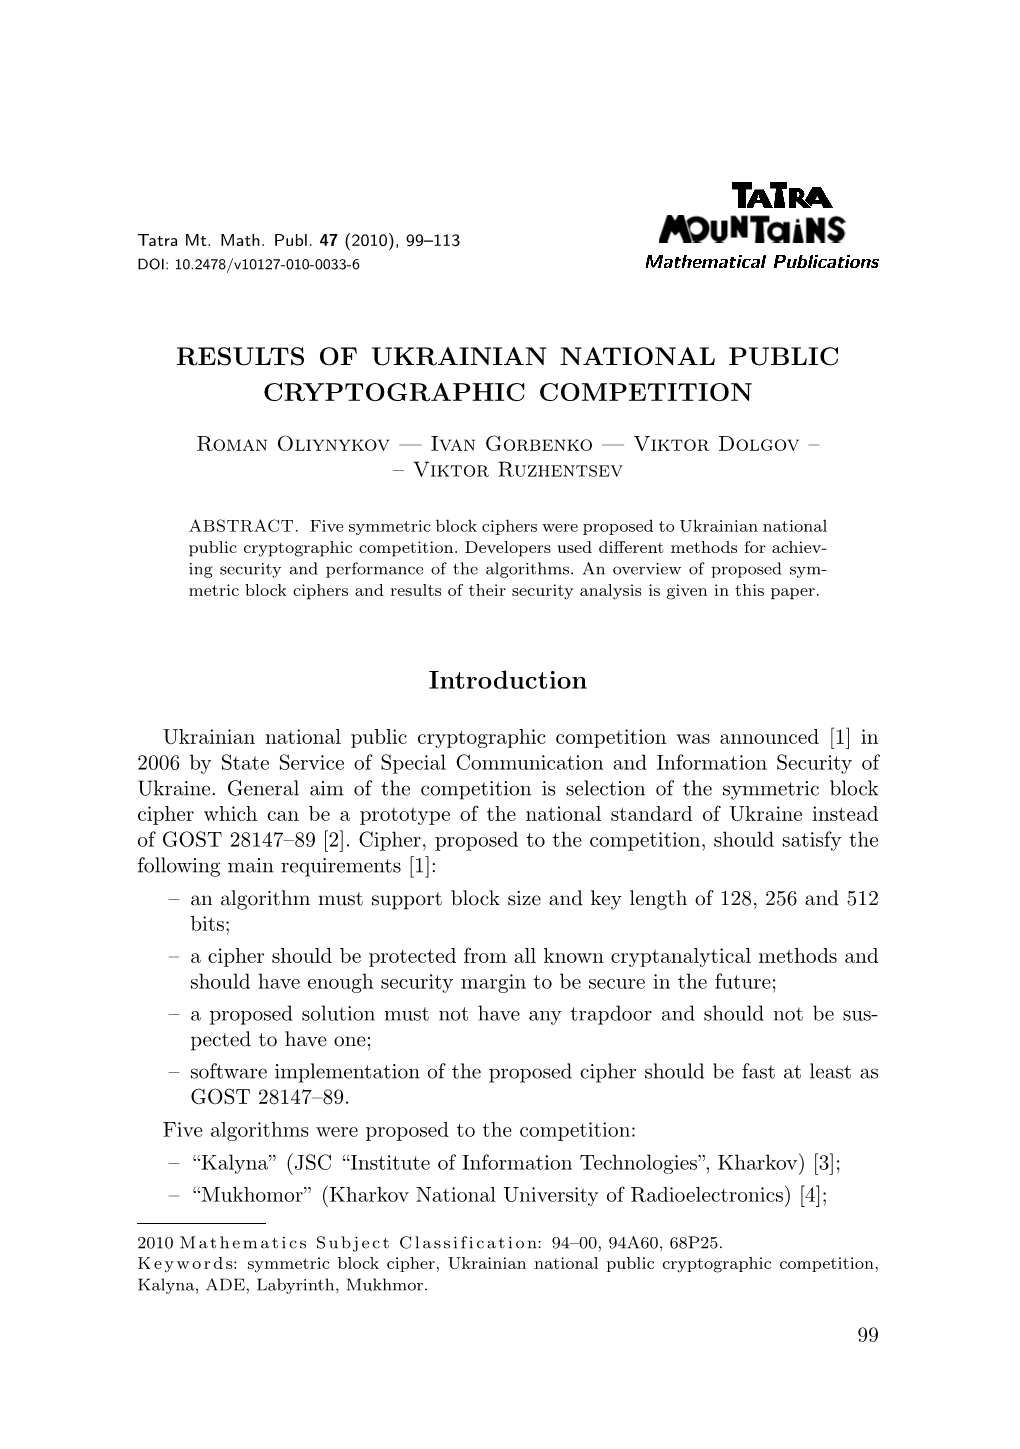 RESULTS of UKRAINIAN NATIONAL PUBLIC CRYPTOGRAPHIC COMPETITION Introduction